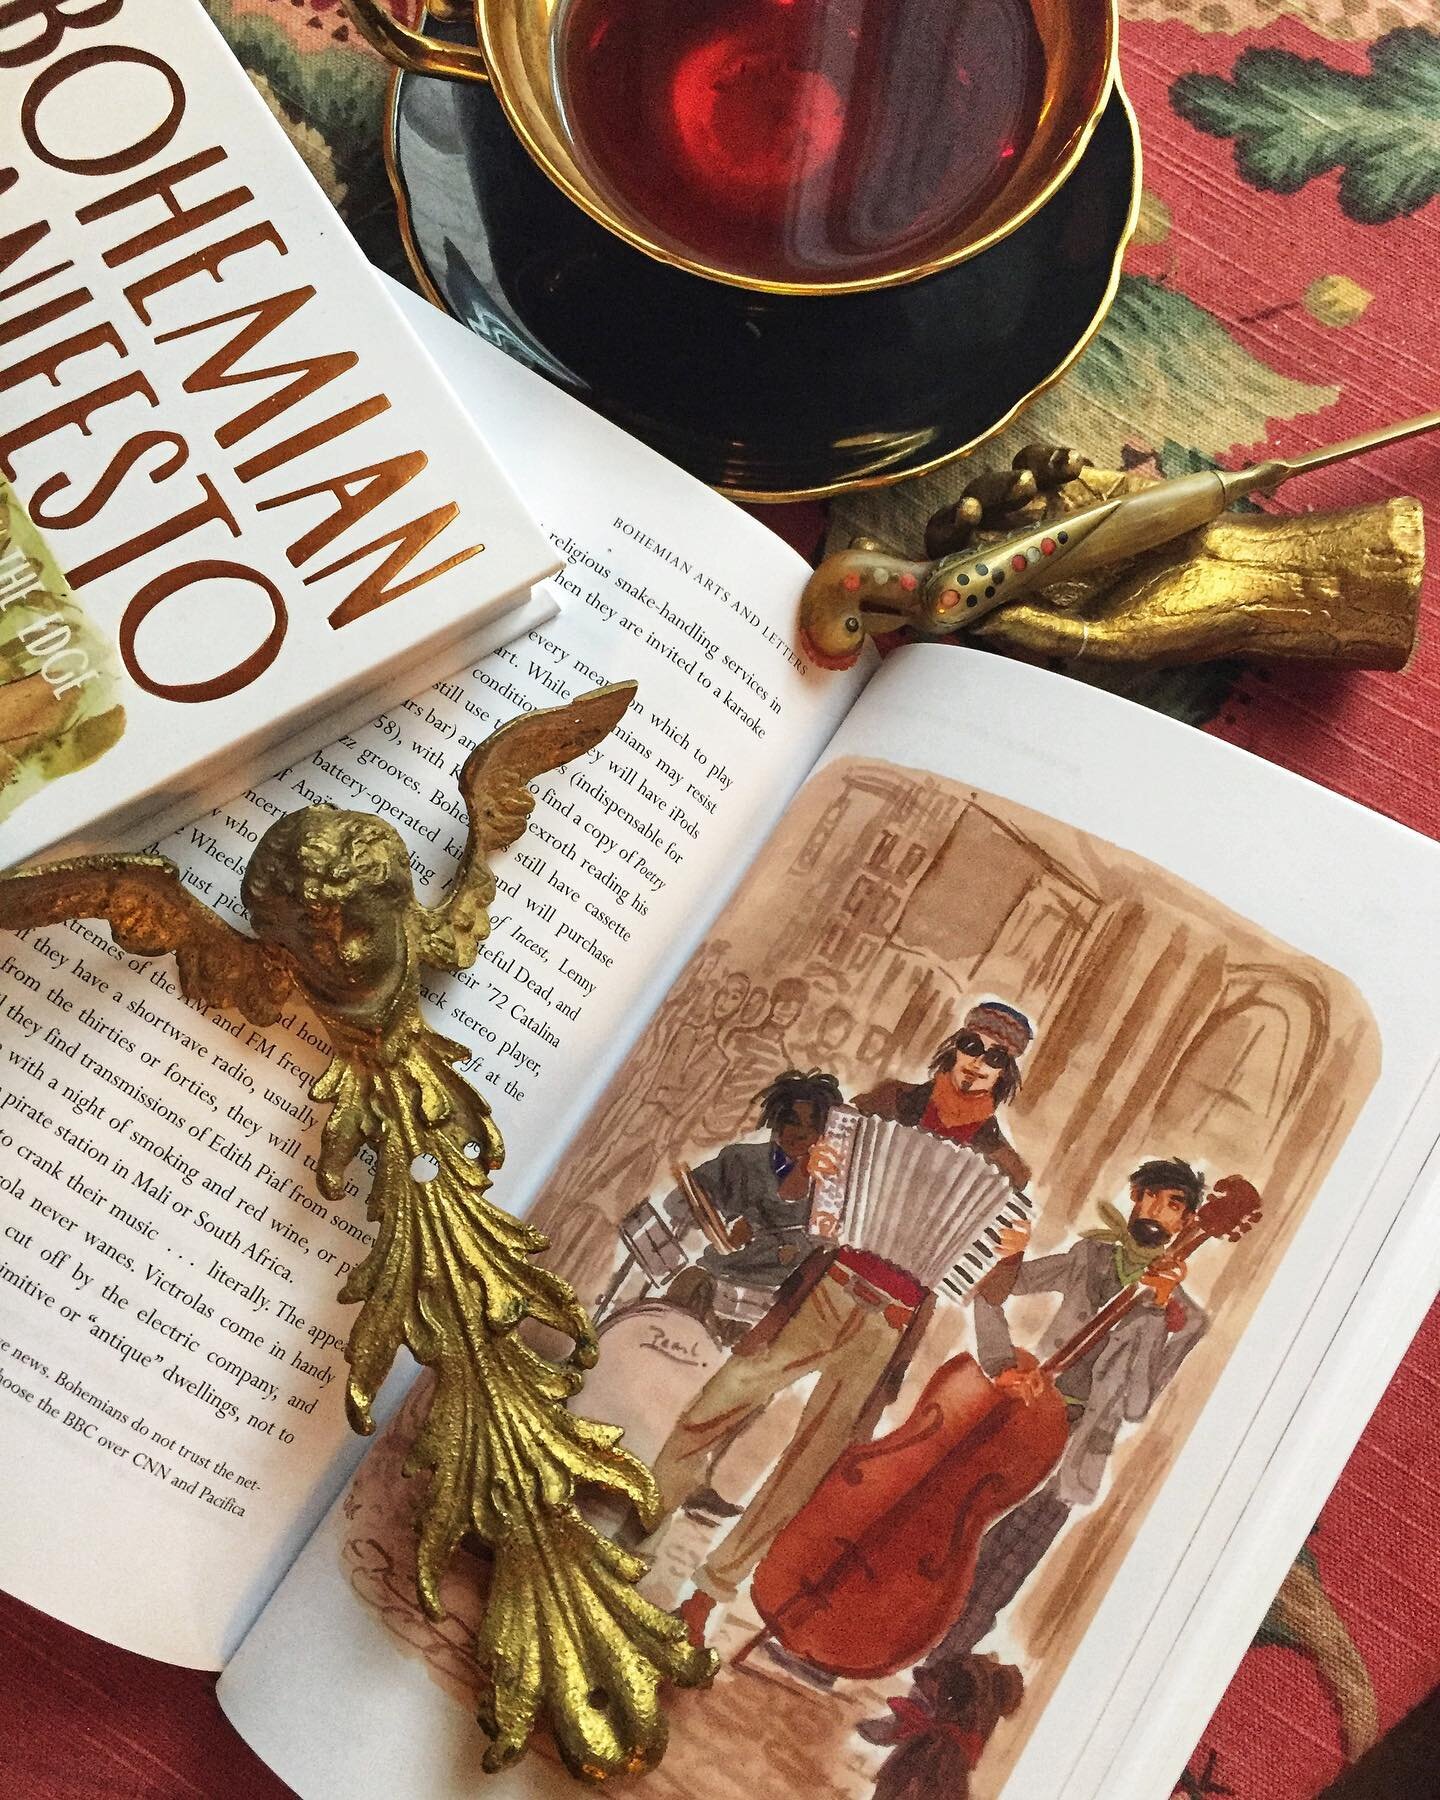 It&rsquo;s the season to make a pot of tea and sit down with a book. You&rsquo;ll find what&rsquo;s on the Bohemian bookshelf (from Beat to Folkloric to Dandy) in our Manifesto currently available only as an ebook but we are working on a new edition!